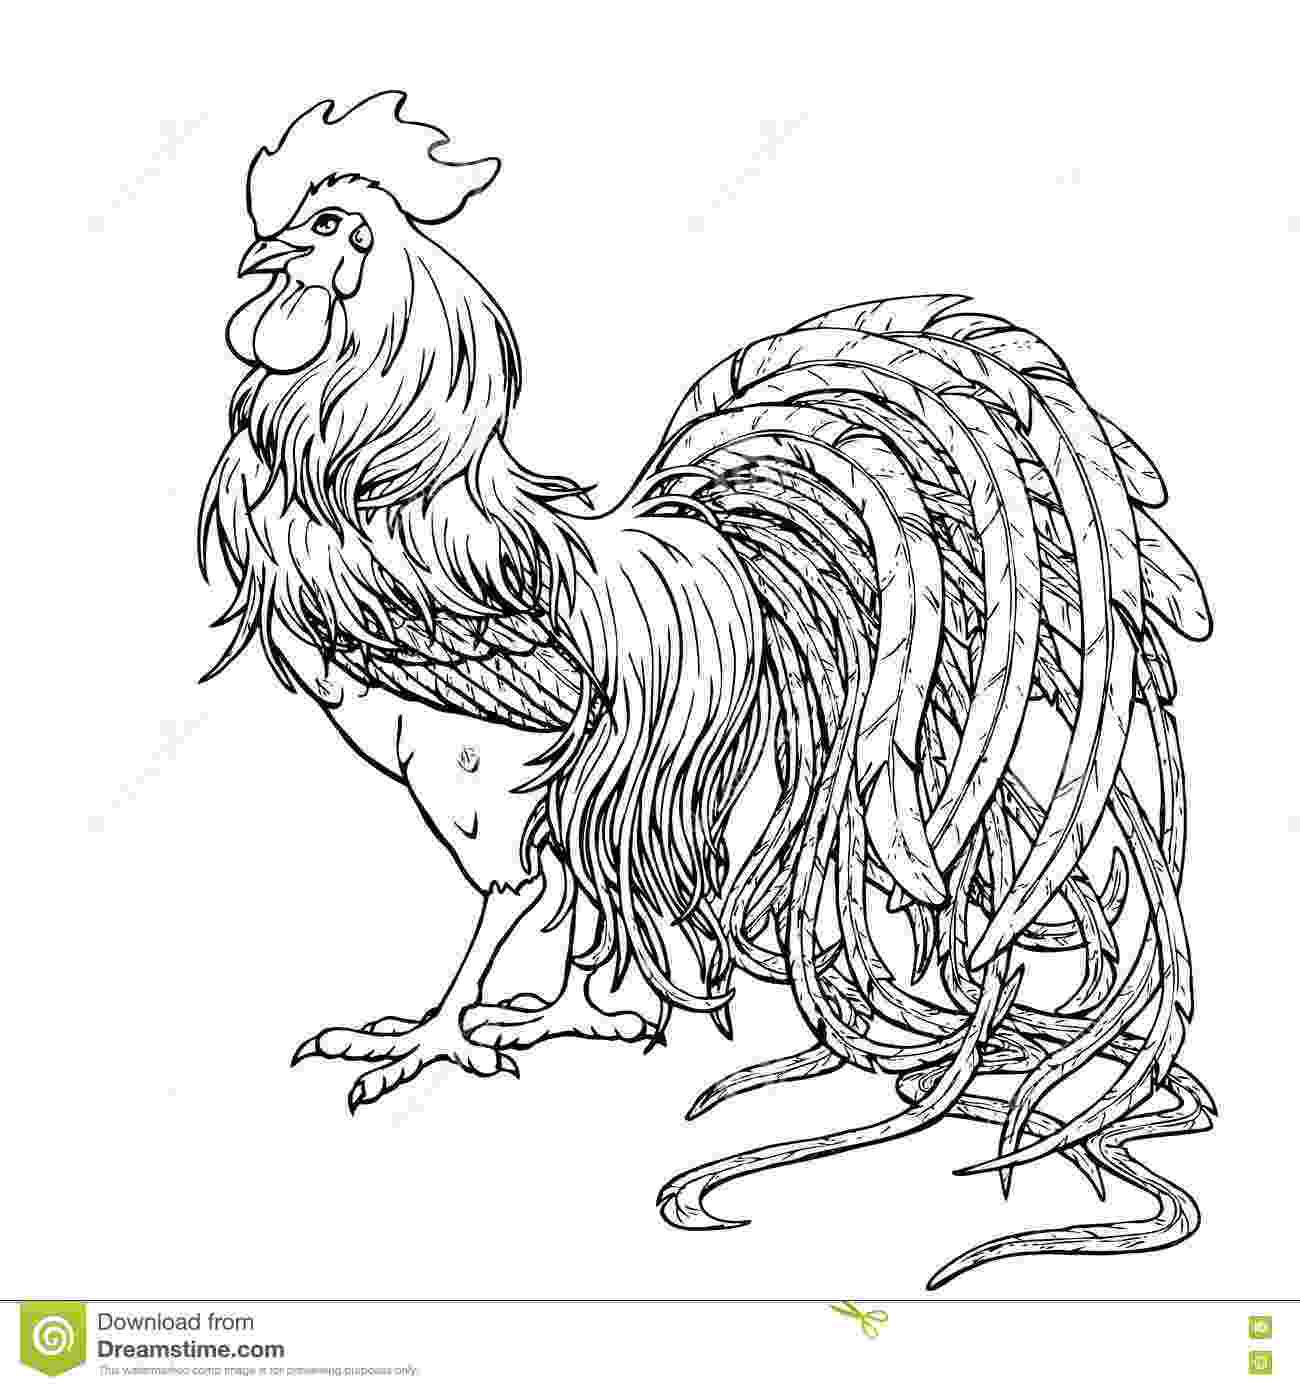 cartoon rooster best black and white rooster illustrations royalty free rooster cartoon 